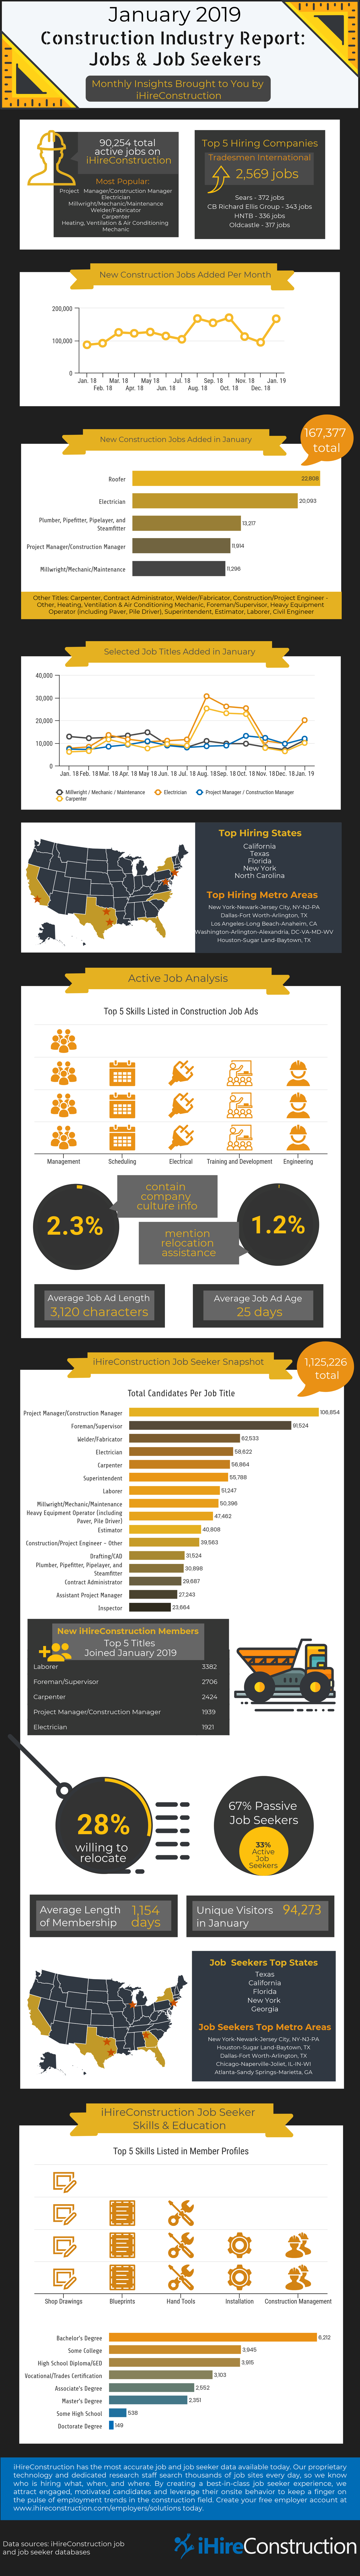 iHireConstruction's January 2019 industry report on construction jobs and job seekers. Infographic.